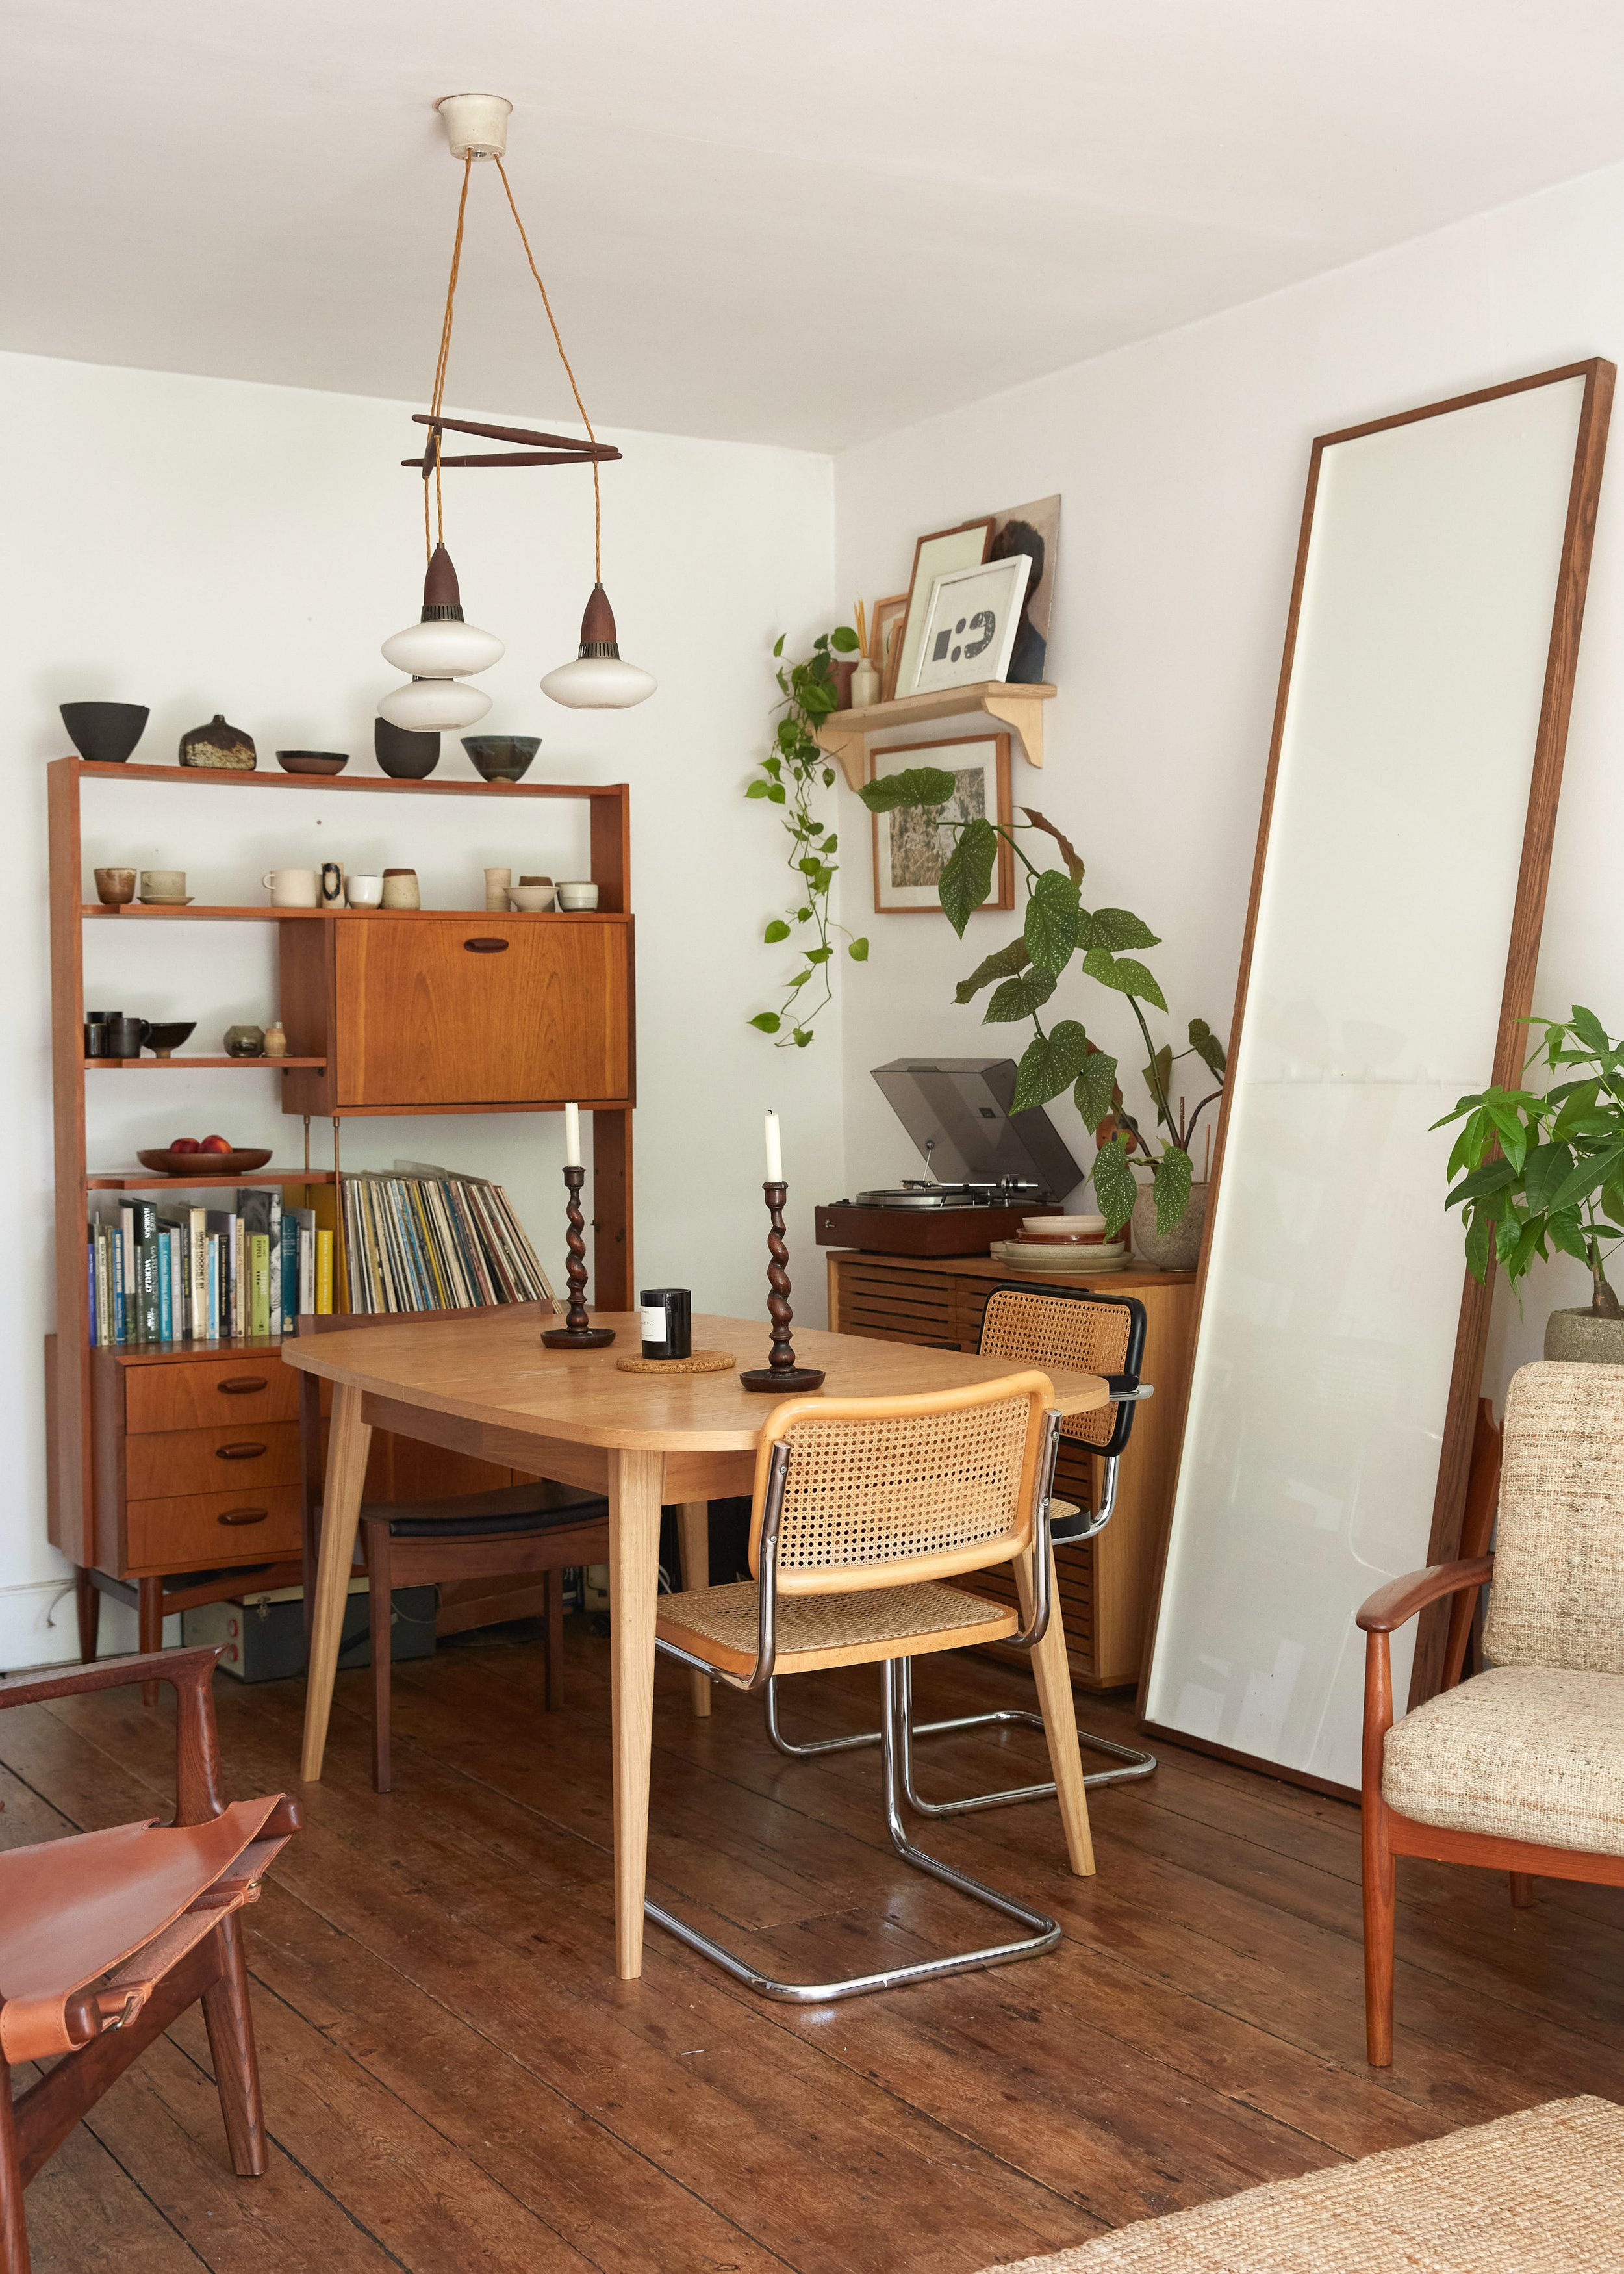 Mid century modern style dining area, with vintage and handmade objects